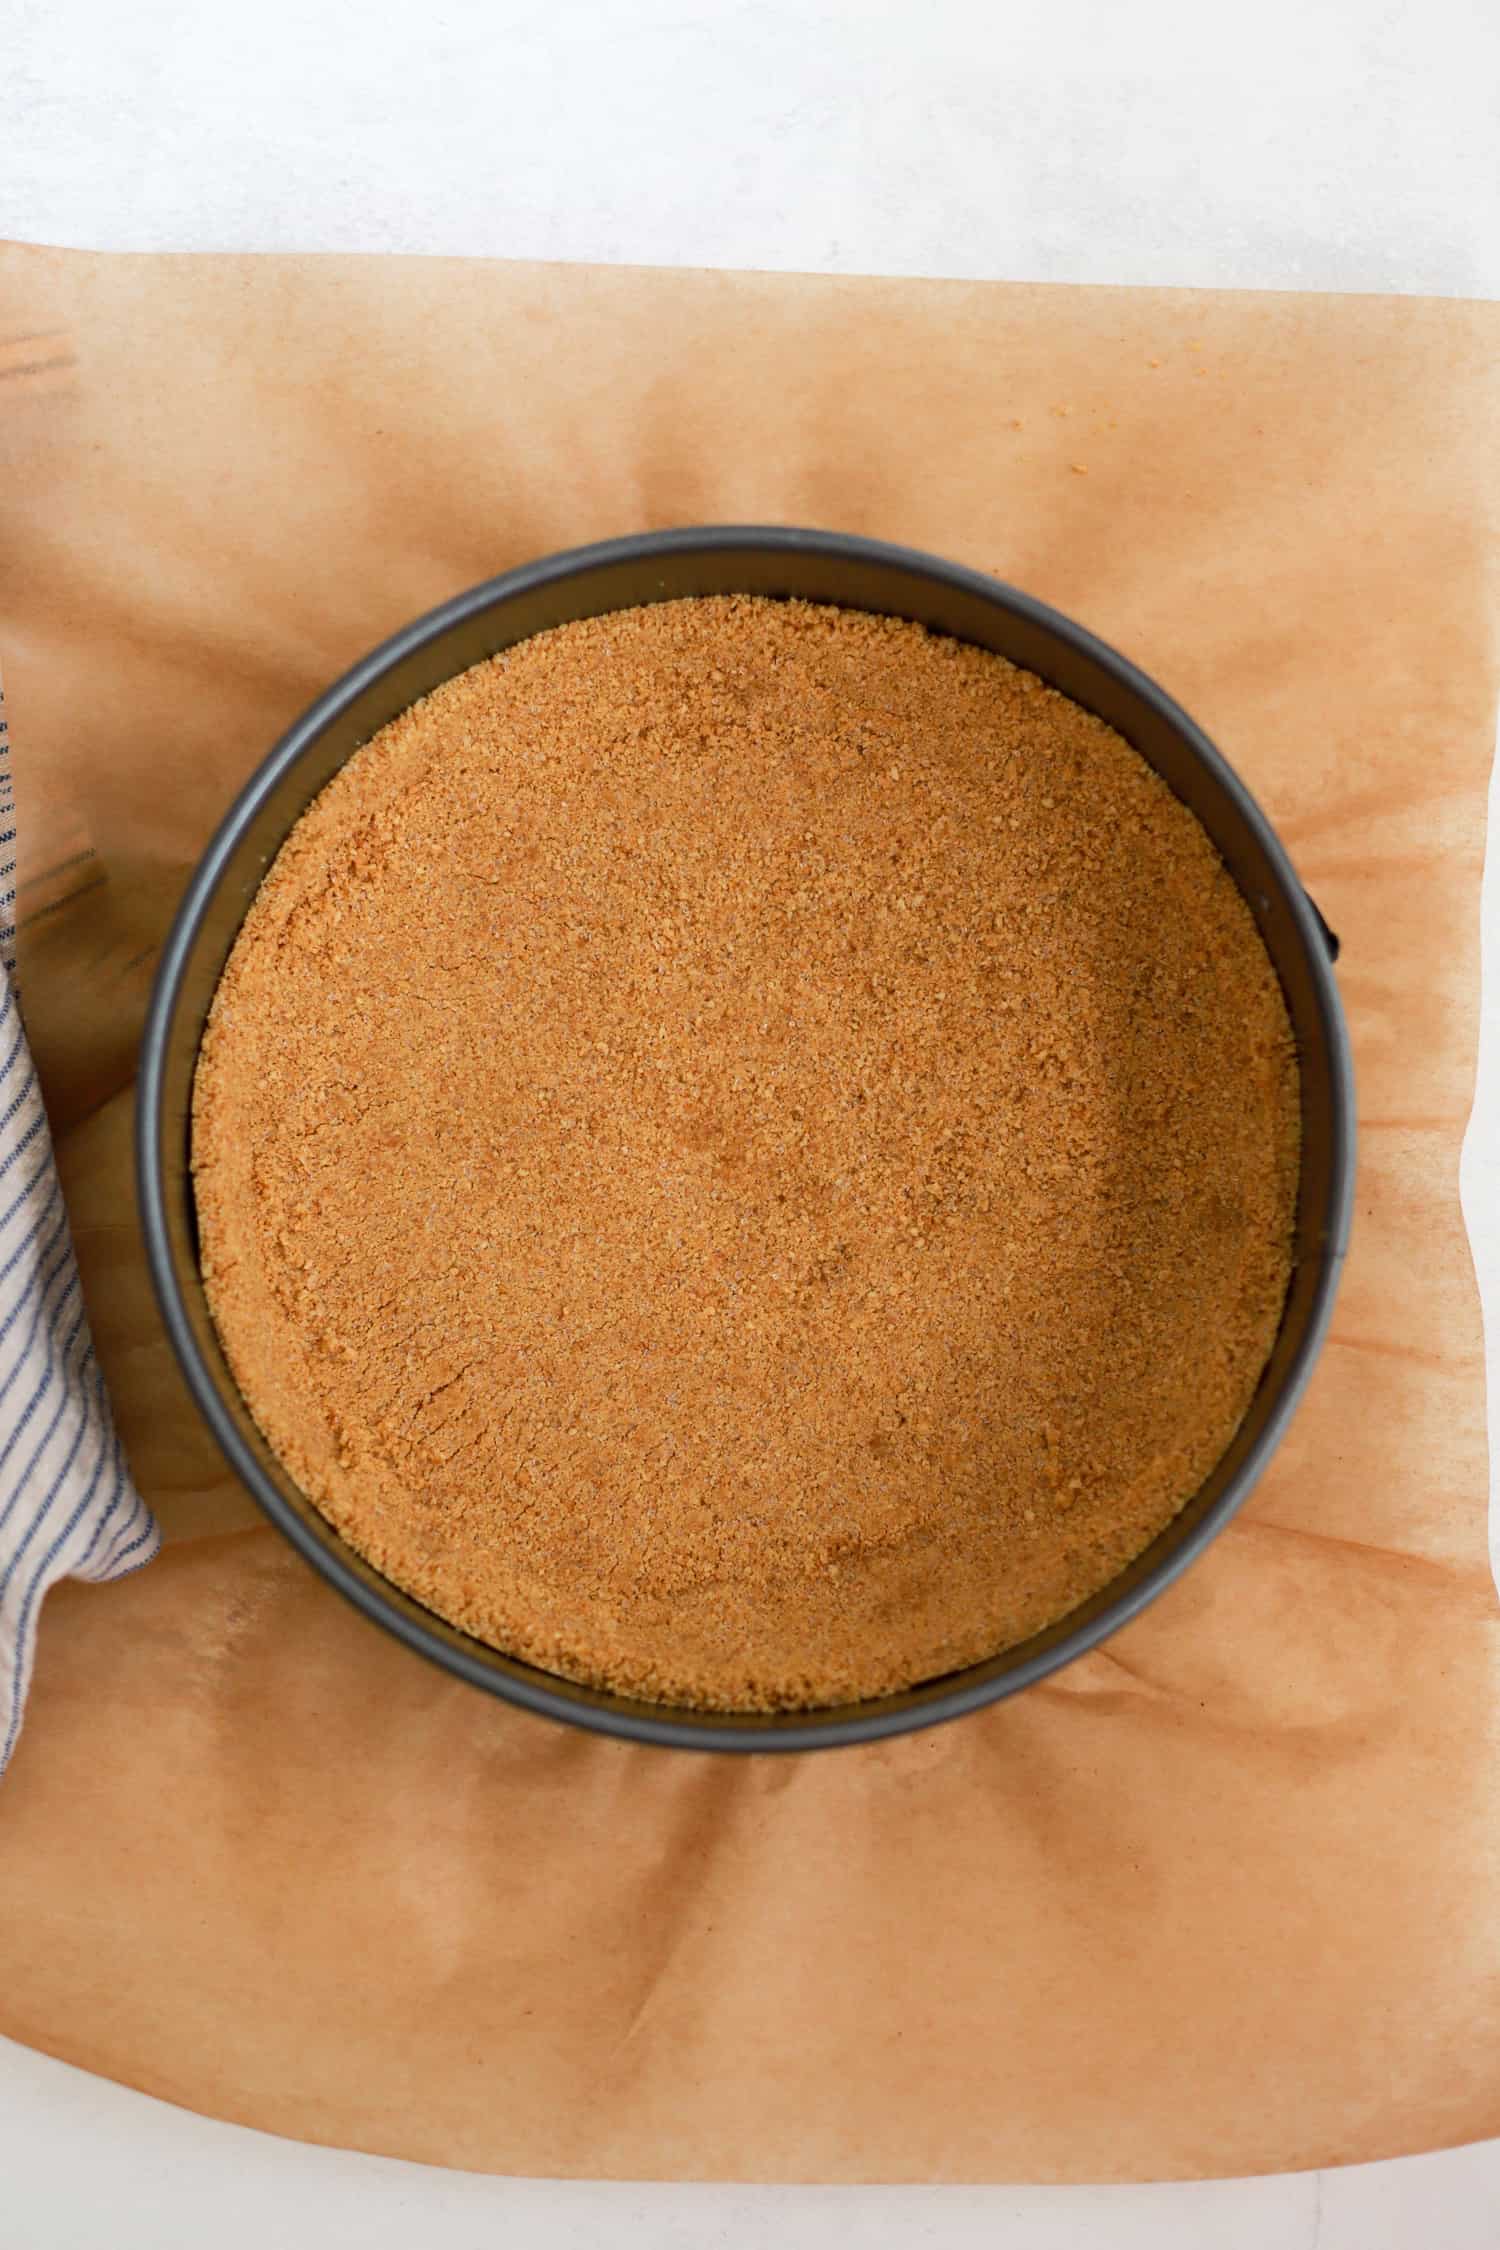 Graham cracker crust pressed into the bottom of a springform pan.